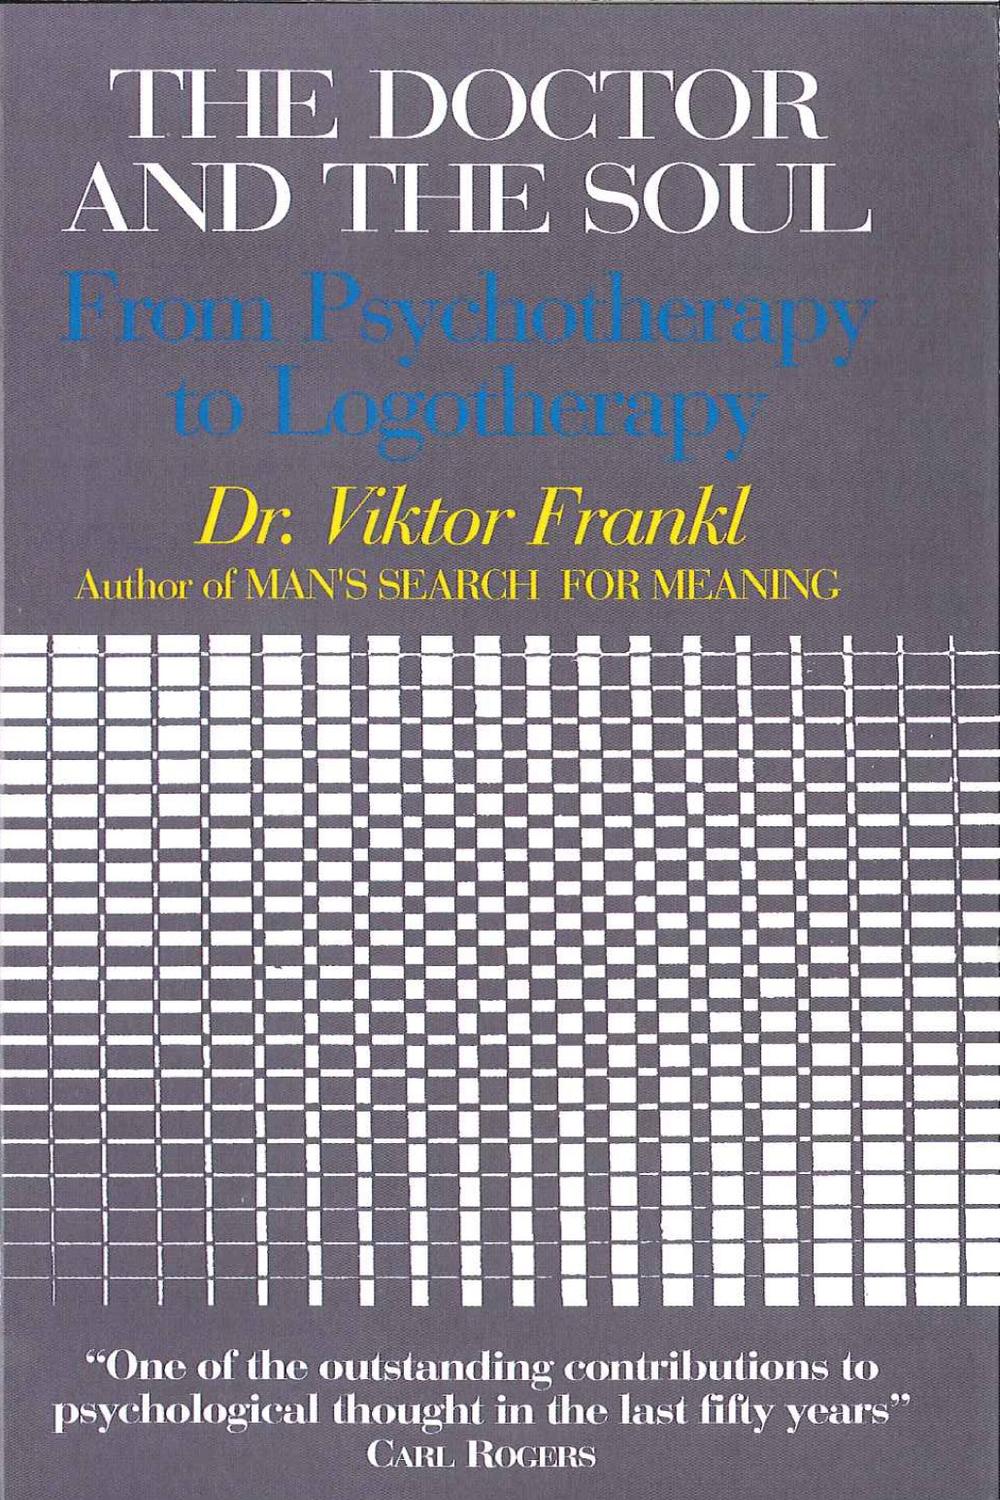 The Doctor and the Soul - Viktor E. Frankl